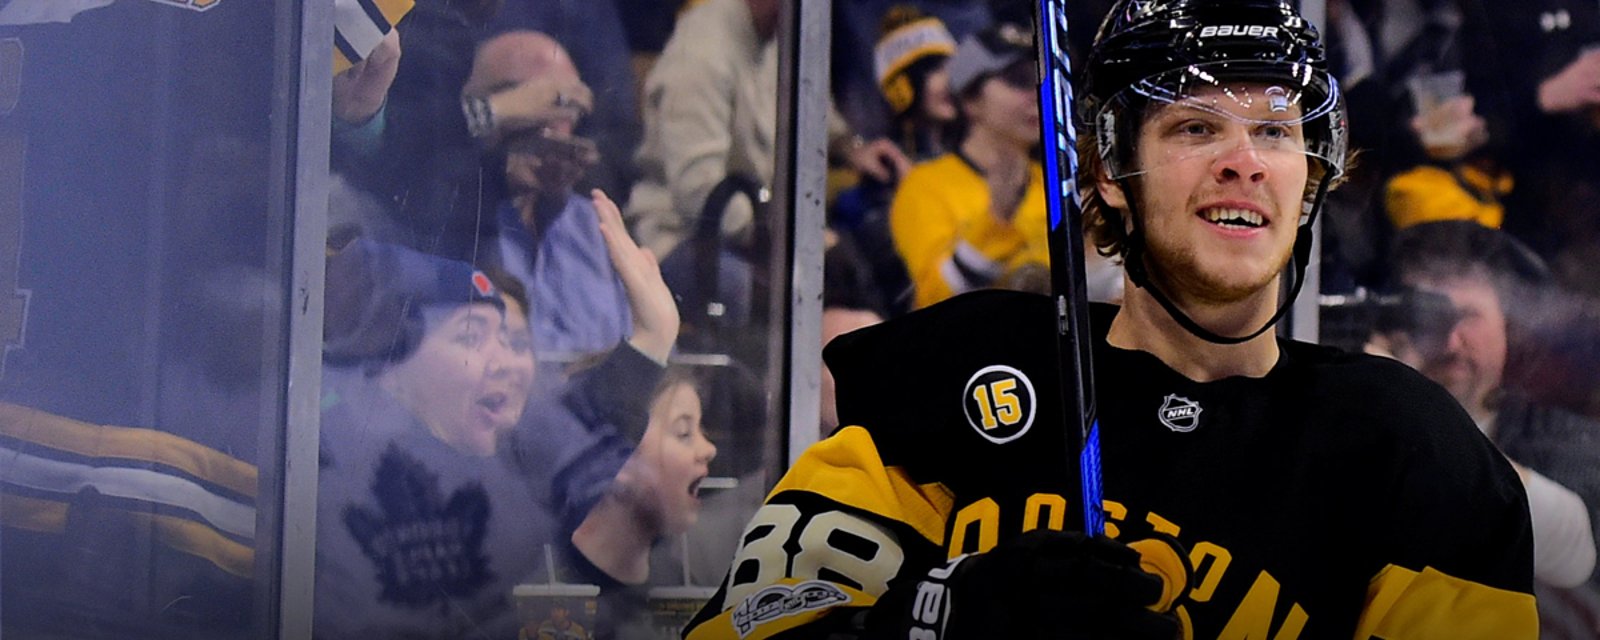 Must see: Pastrnak goes end to end to score an absolute BEAUTY